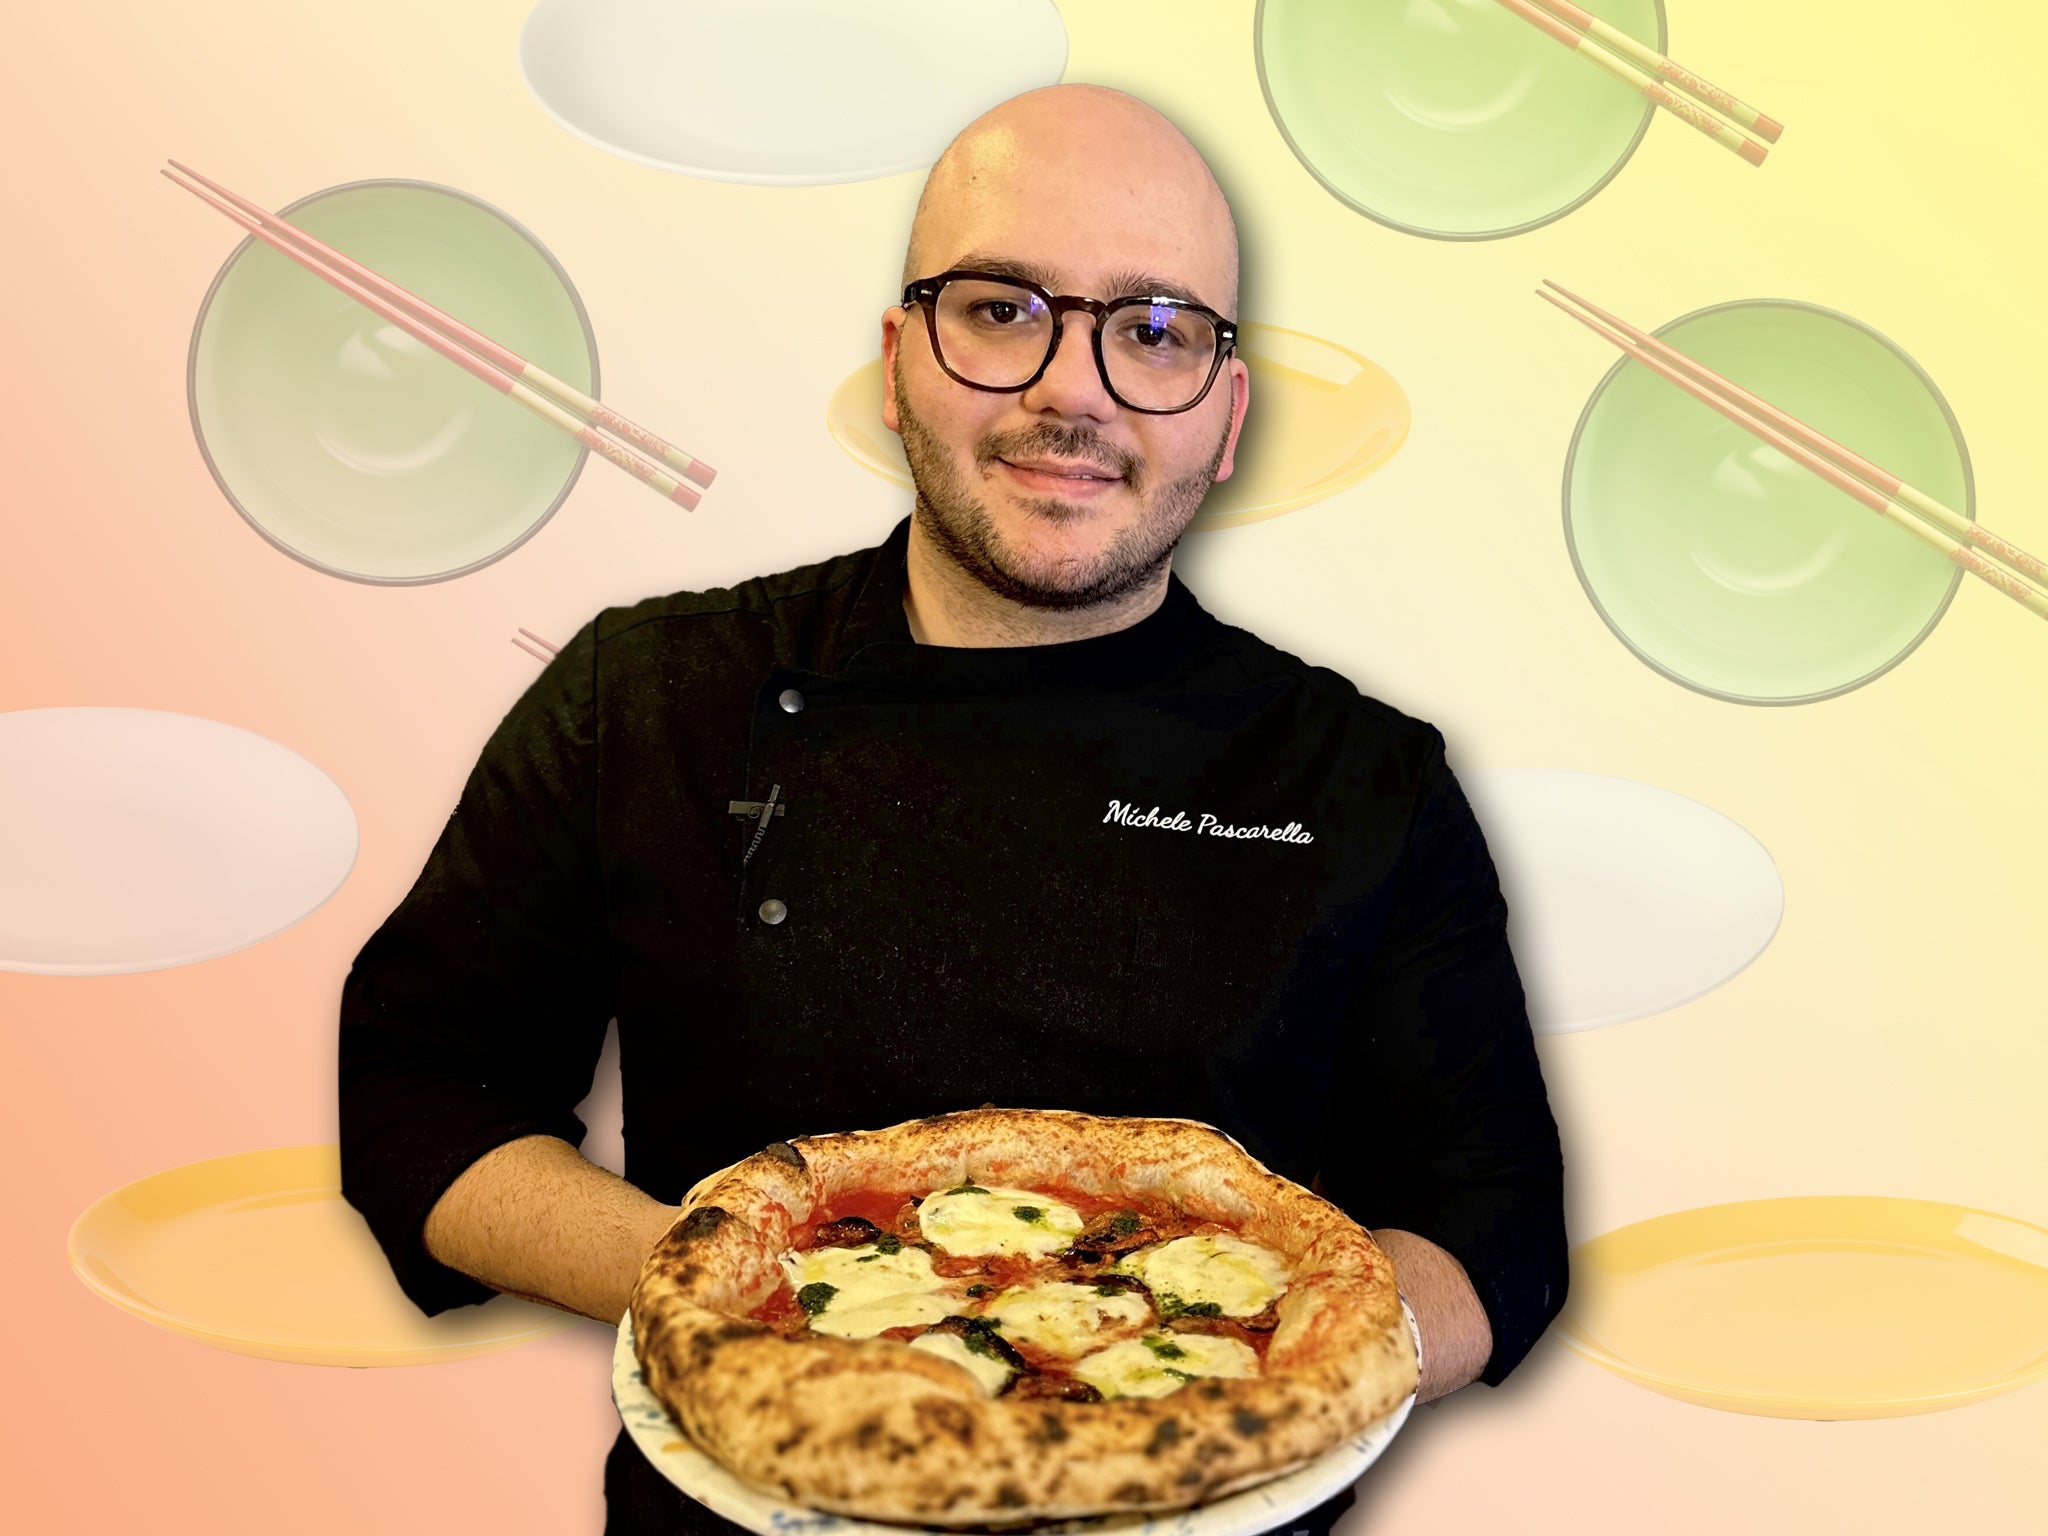 As a child, Pascarella started working in a pizzeria in Caserta, the city near Naples where he grew up